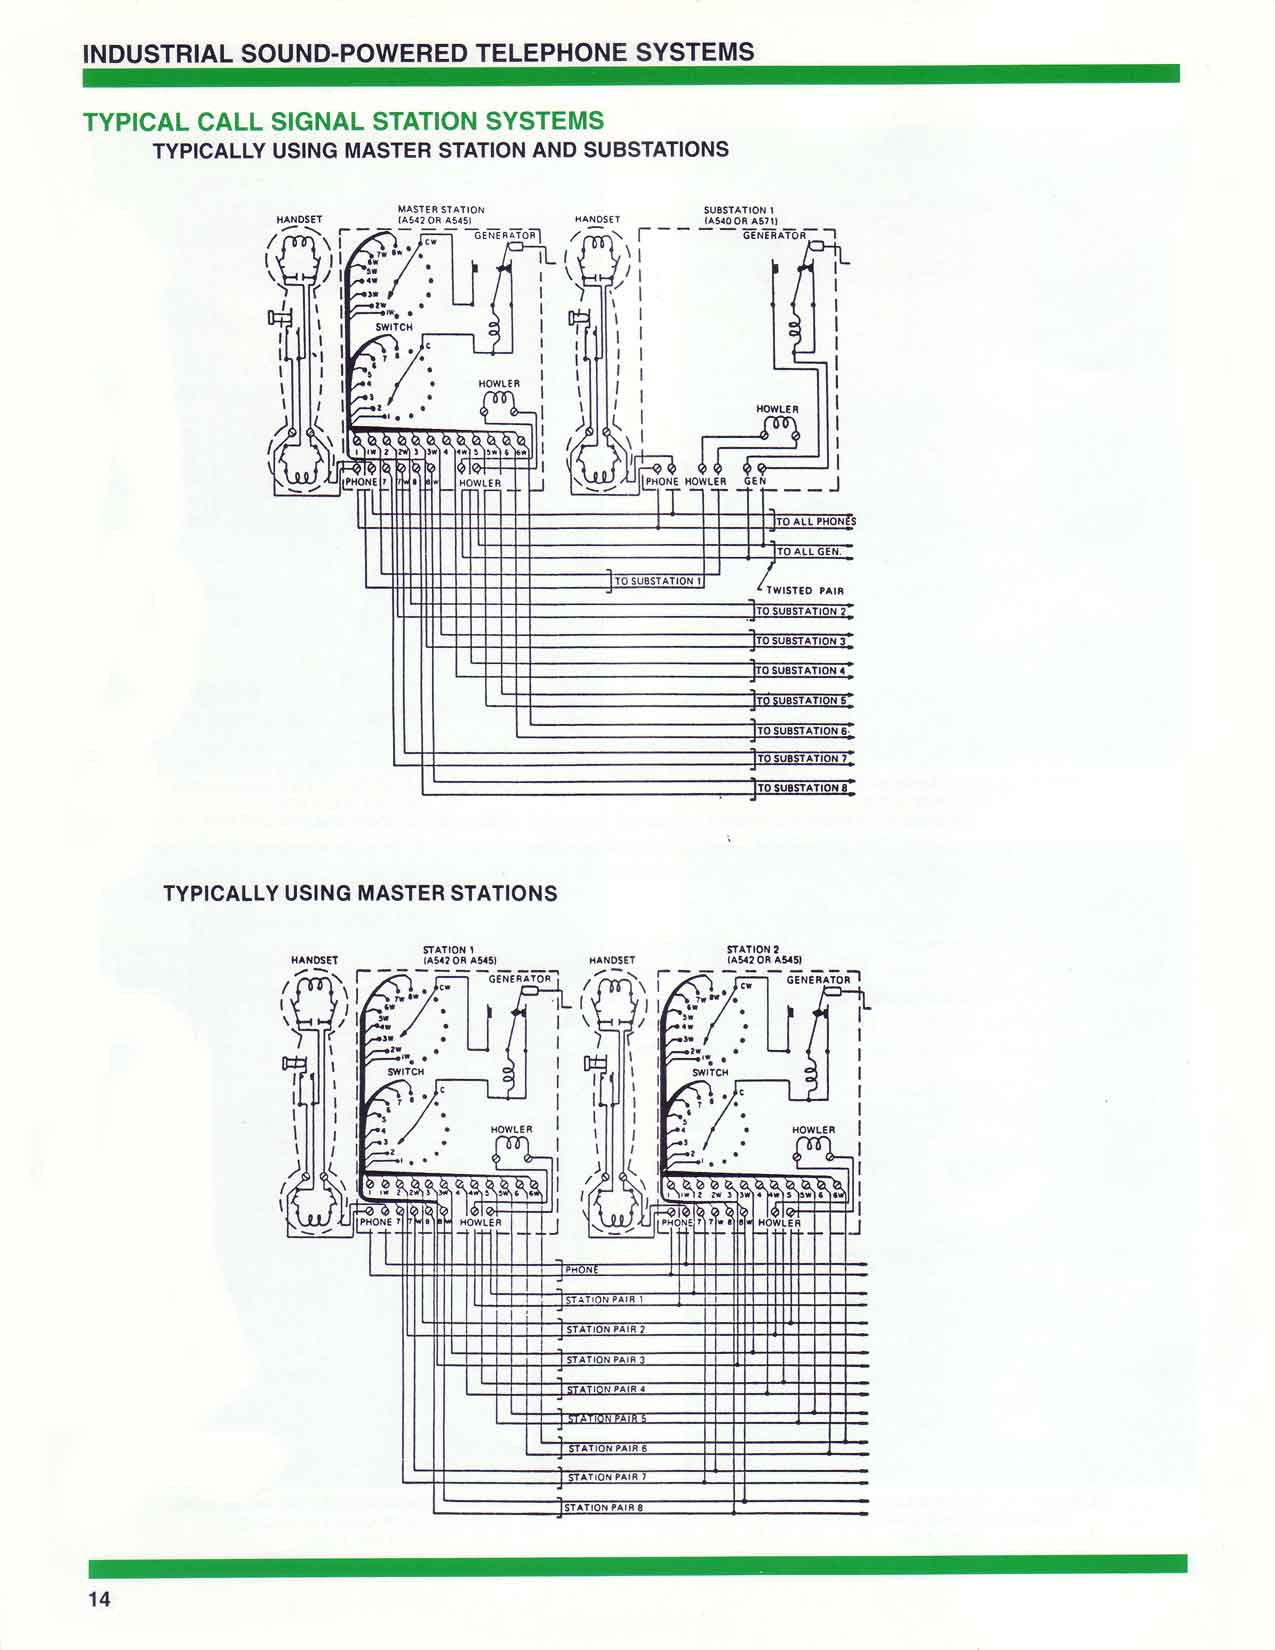 Industrial sound-powered telephone systems - call station schematic